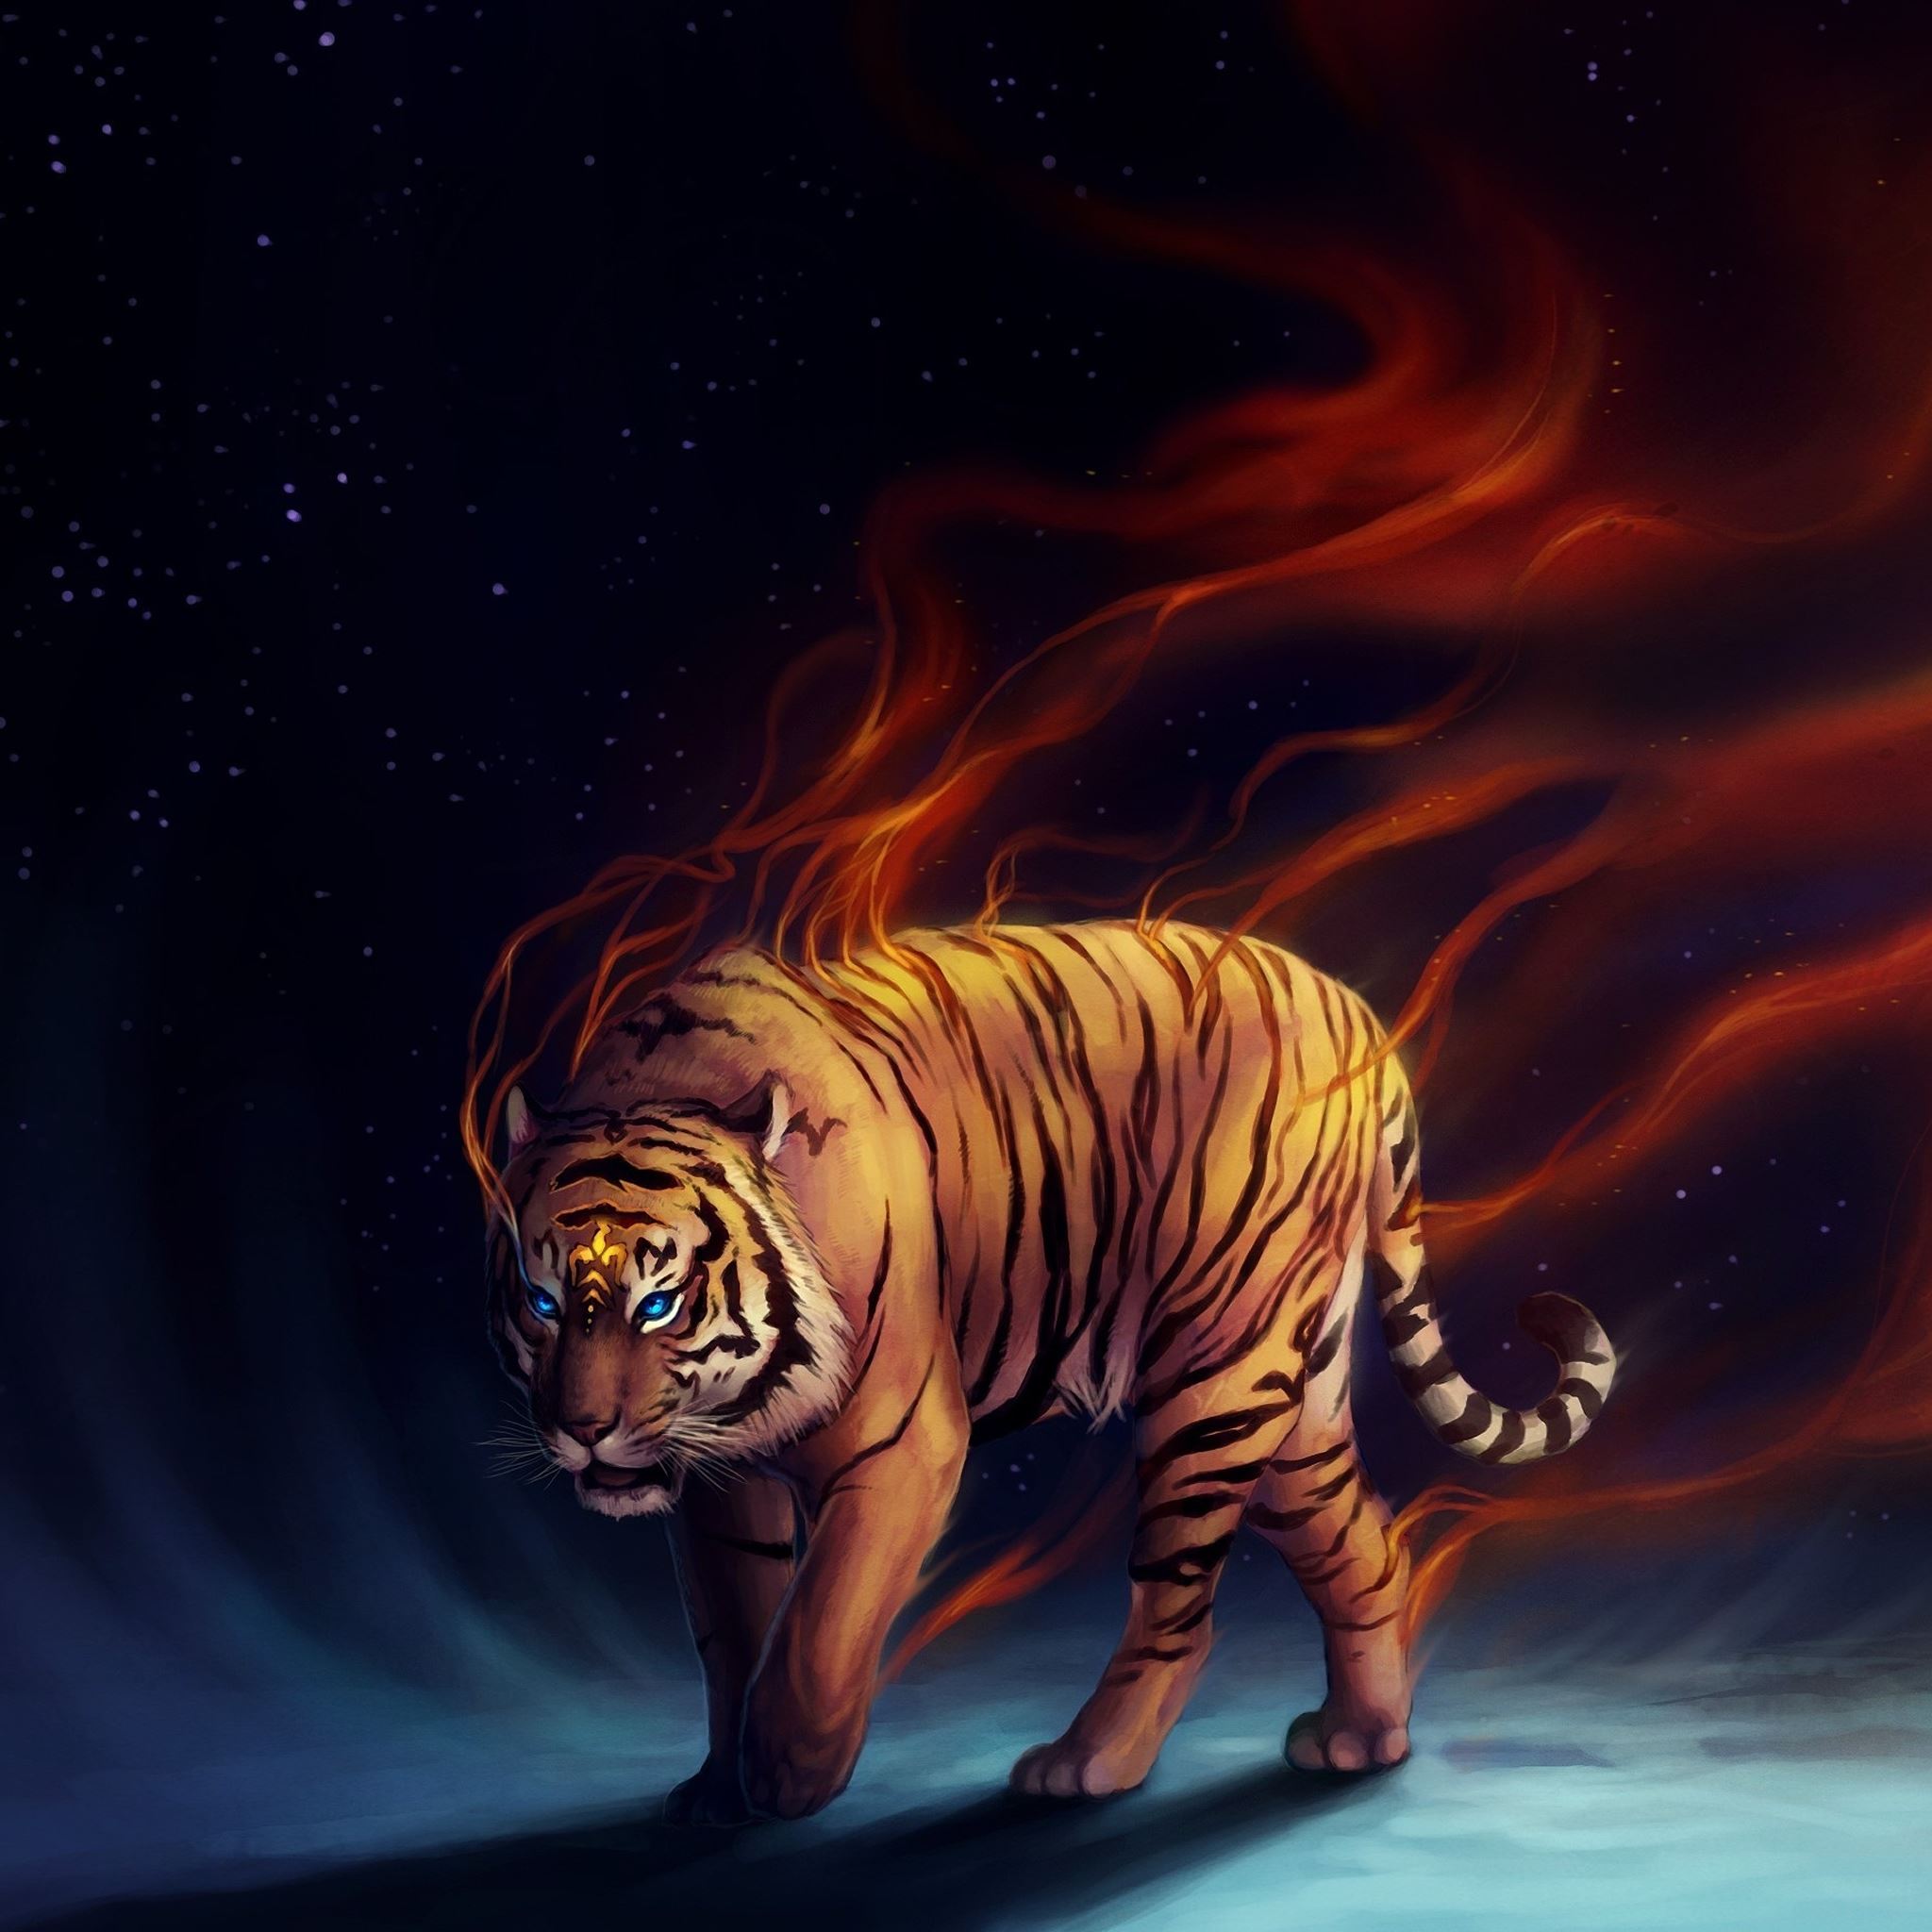 Scary Tiger Picture Background Images, HD Pictures and Wallpaper For Free  Download | Pngtree